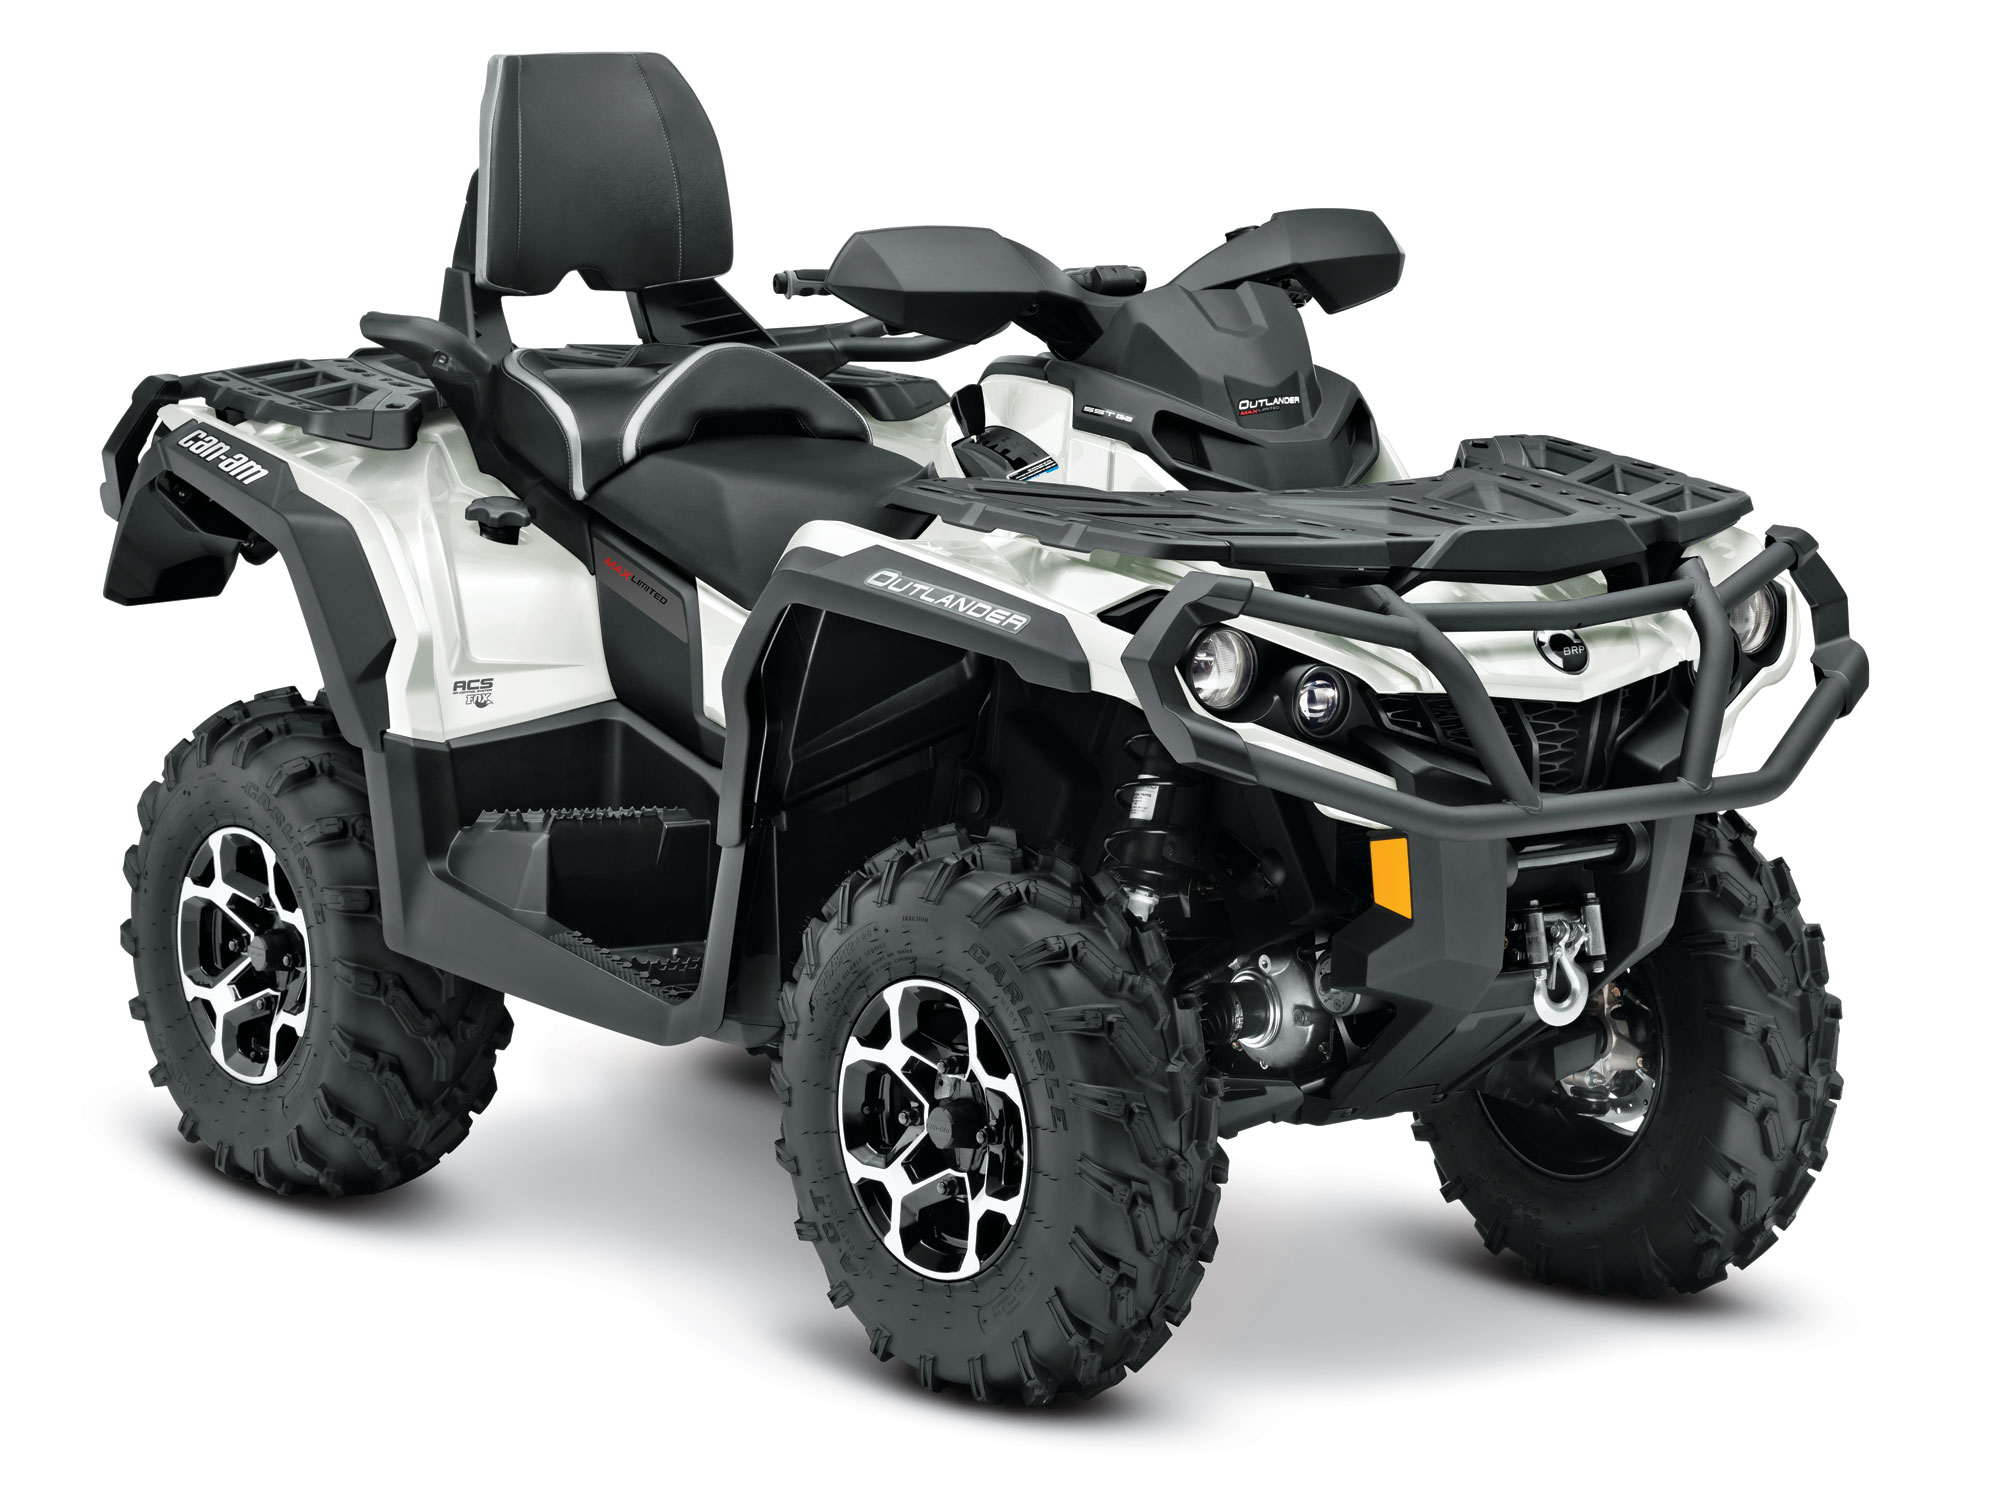 2013 Can-Am Outlander MAX LIMITED 1000 Review